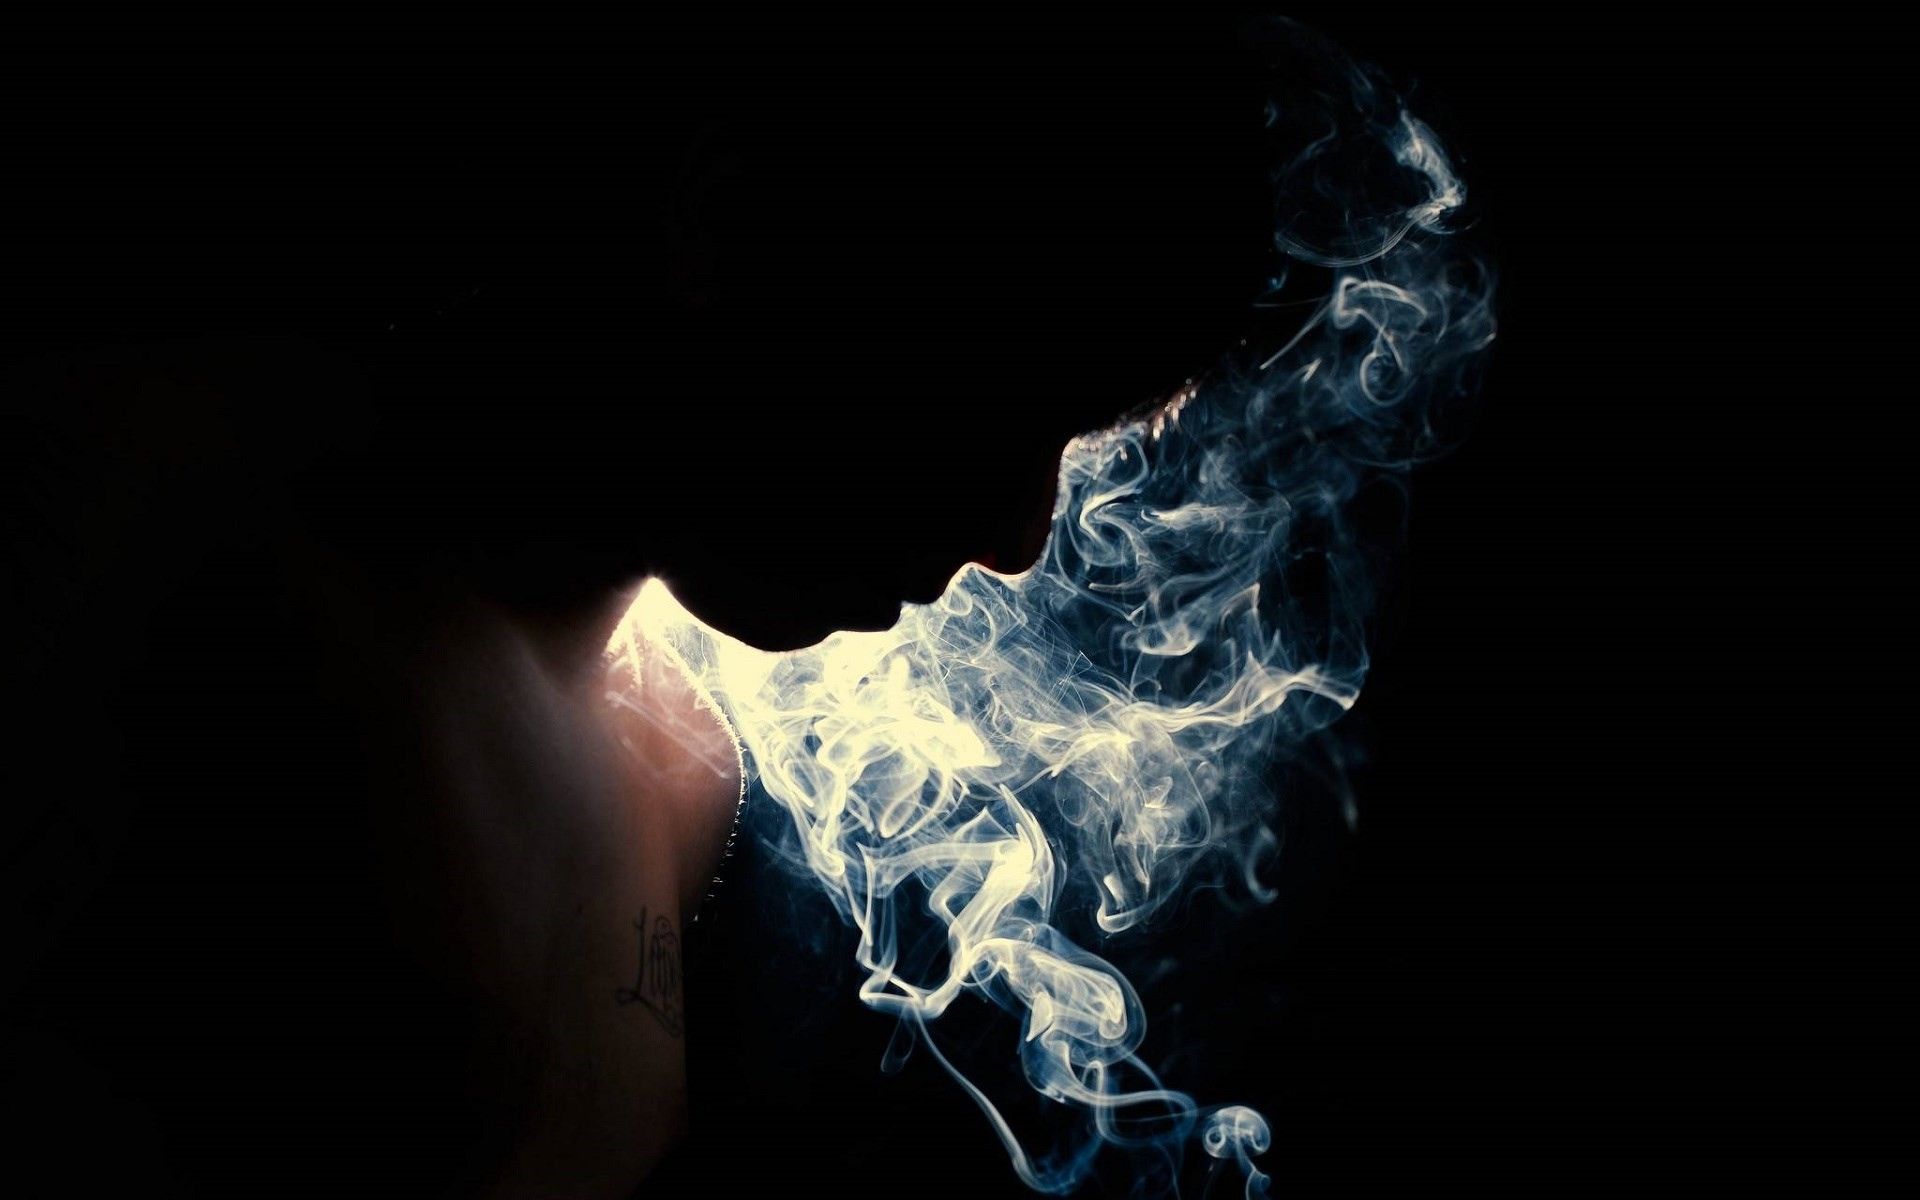 A person with smoke coming out of their mouth - Smoke